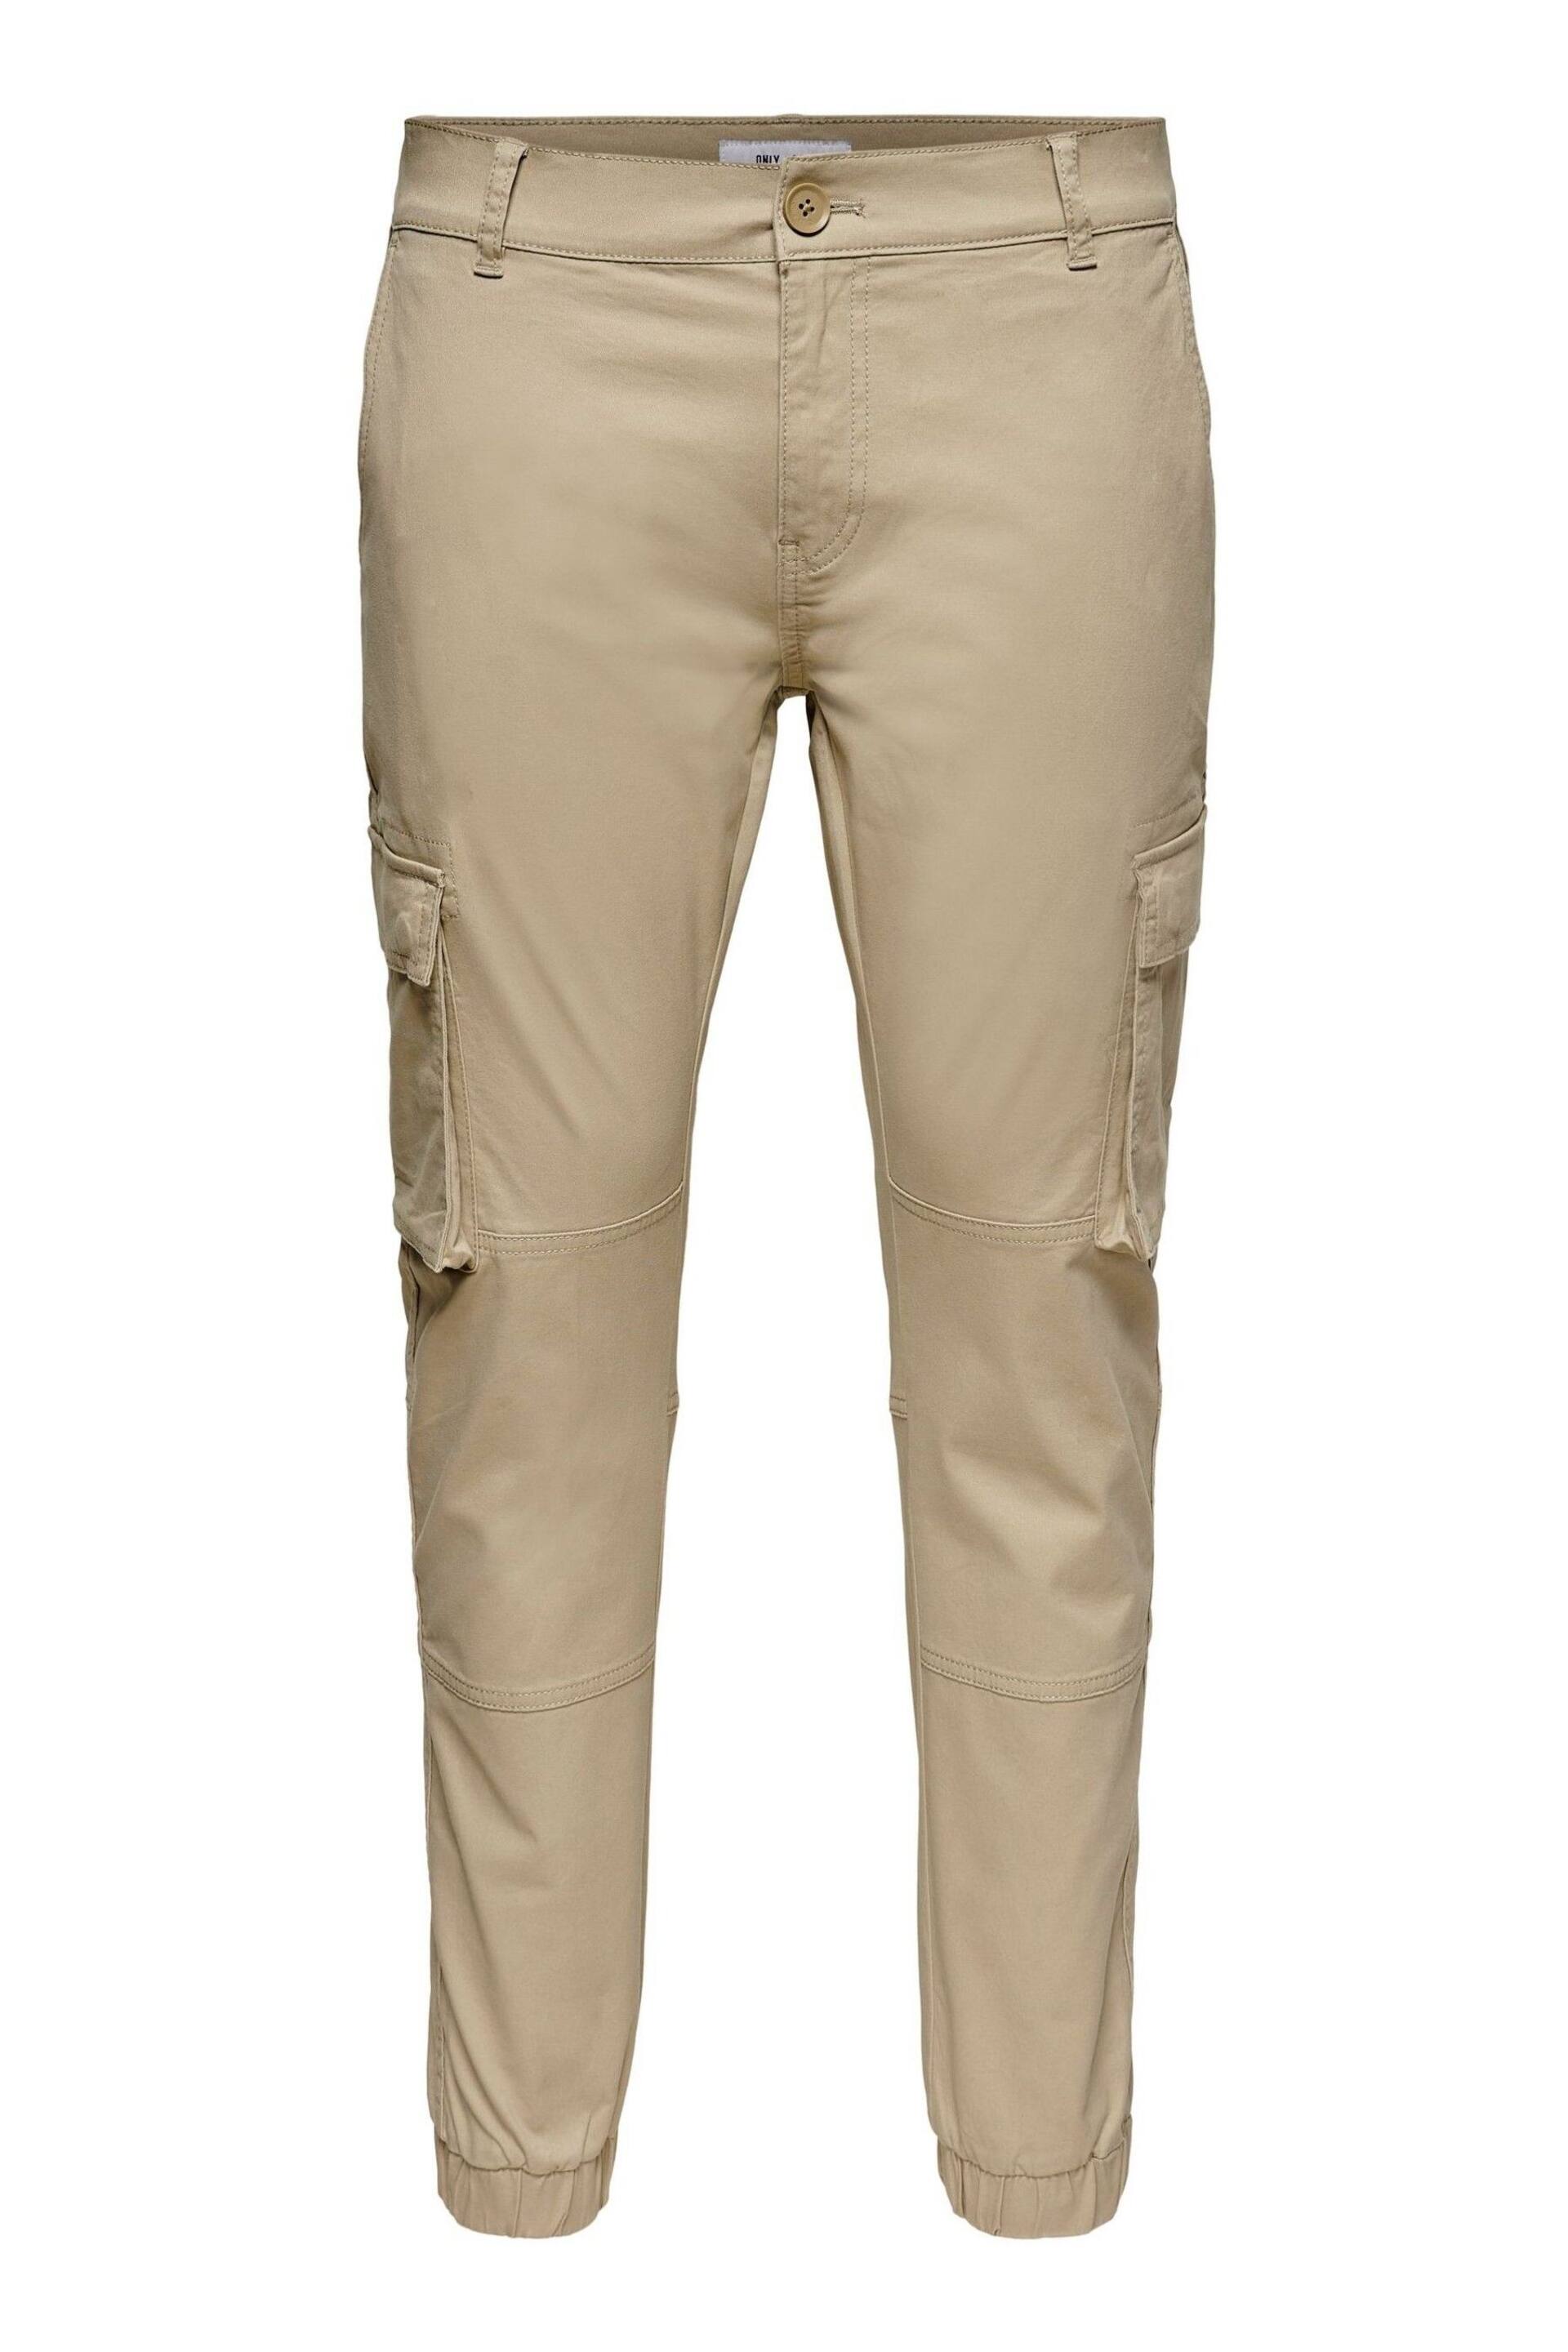 Only & Sons Cream Cargo Detail Trousers with Cuffed Ankle - Image 5 of 5